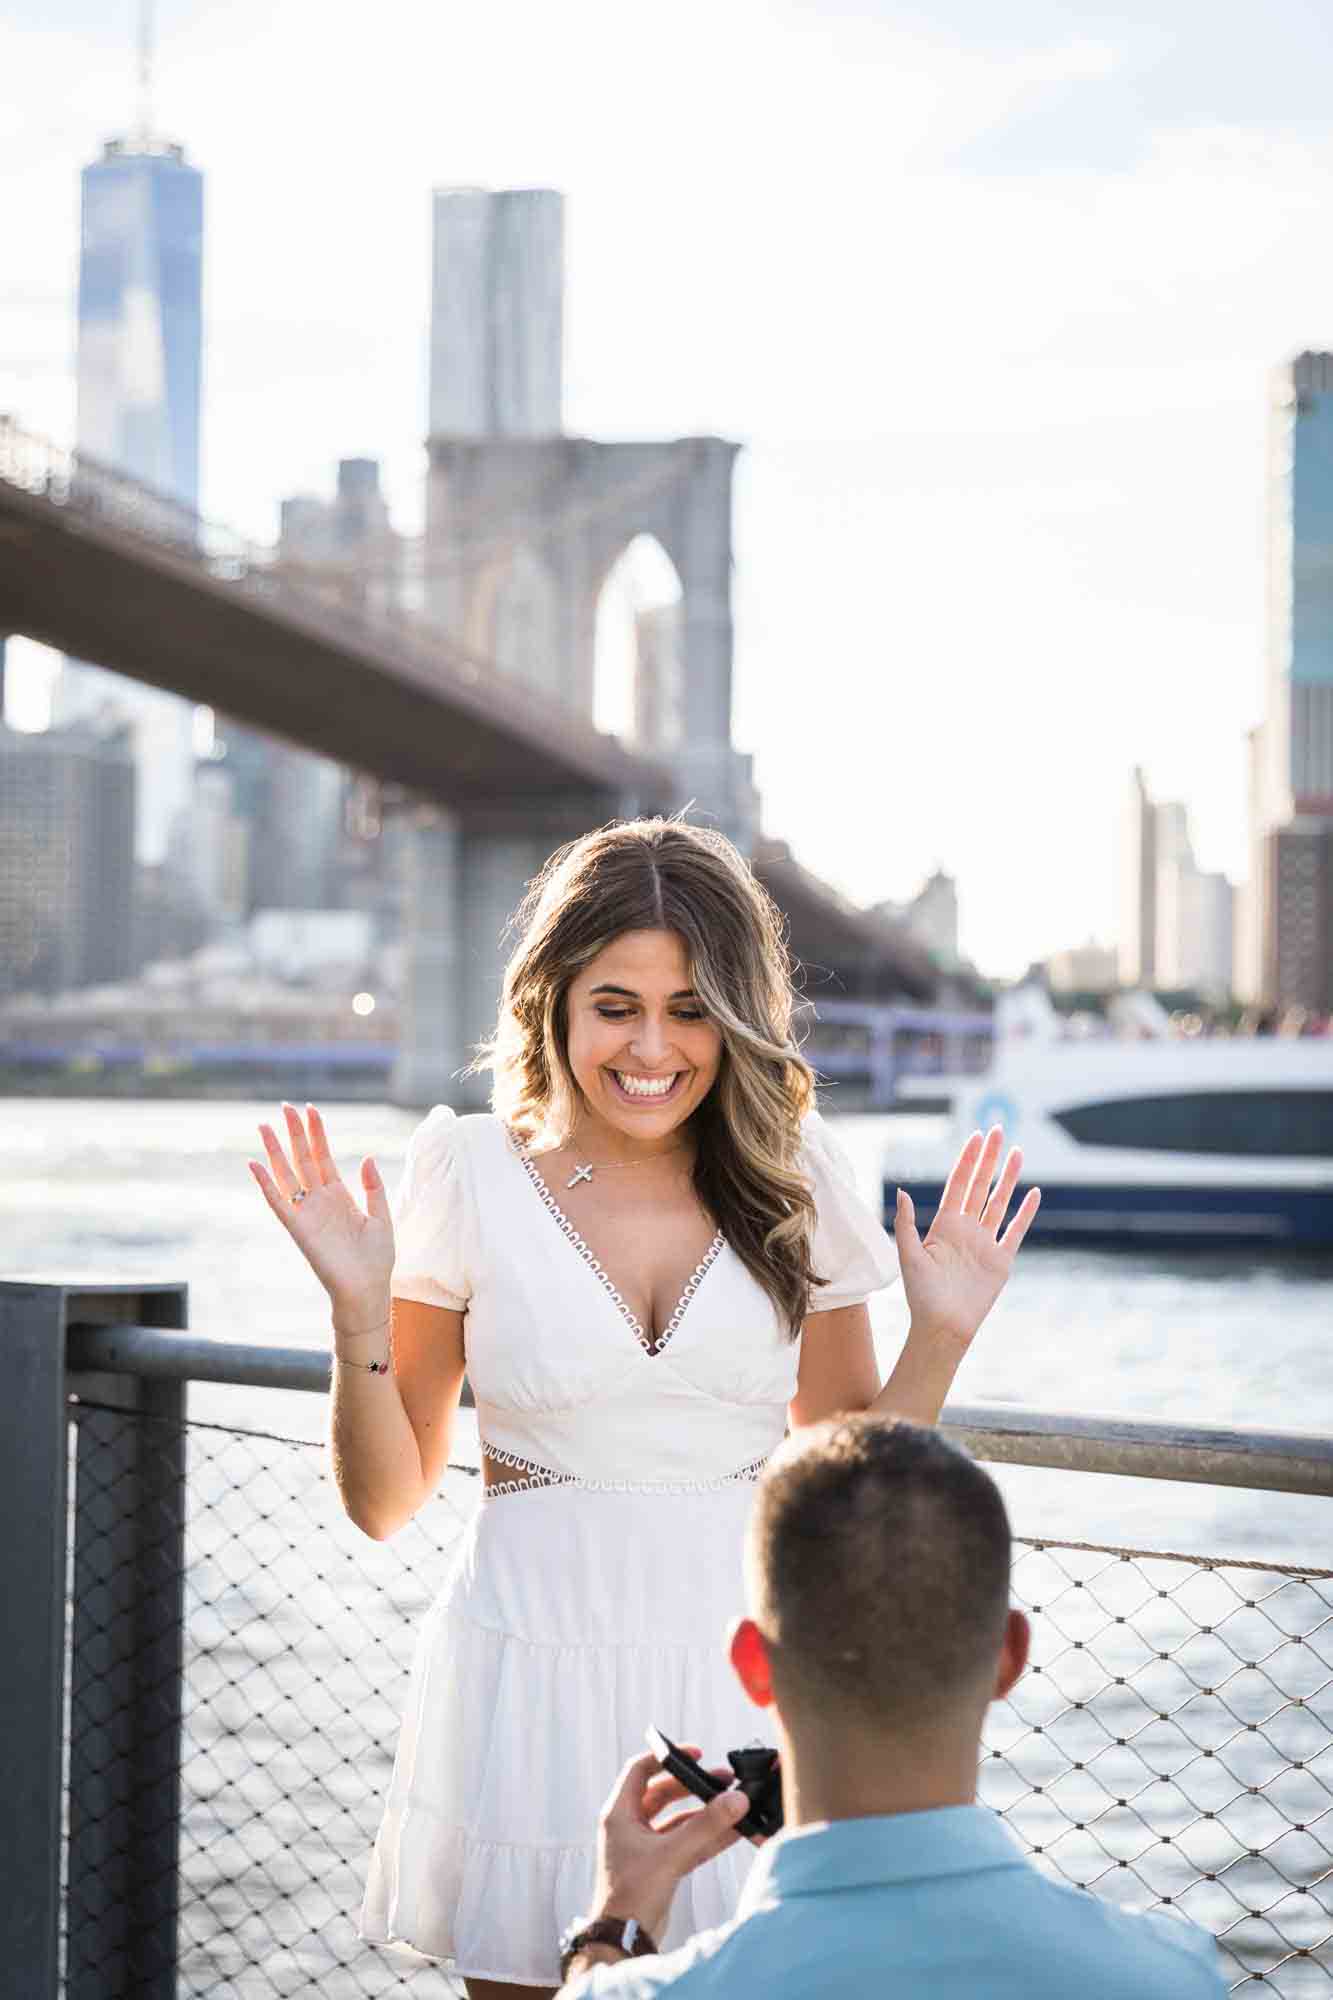 Woman with hands raised reacting excitedly during a Brooklyn Bridge Park surprise proposal